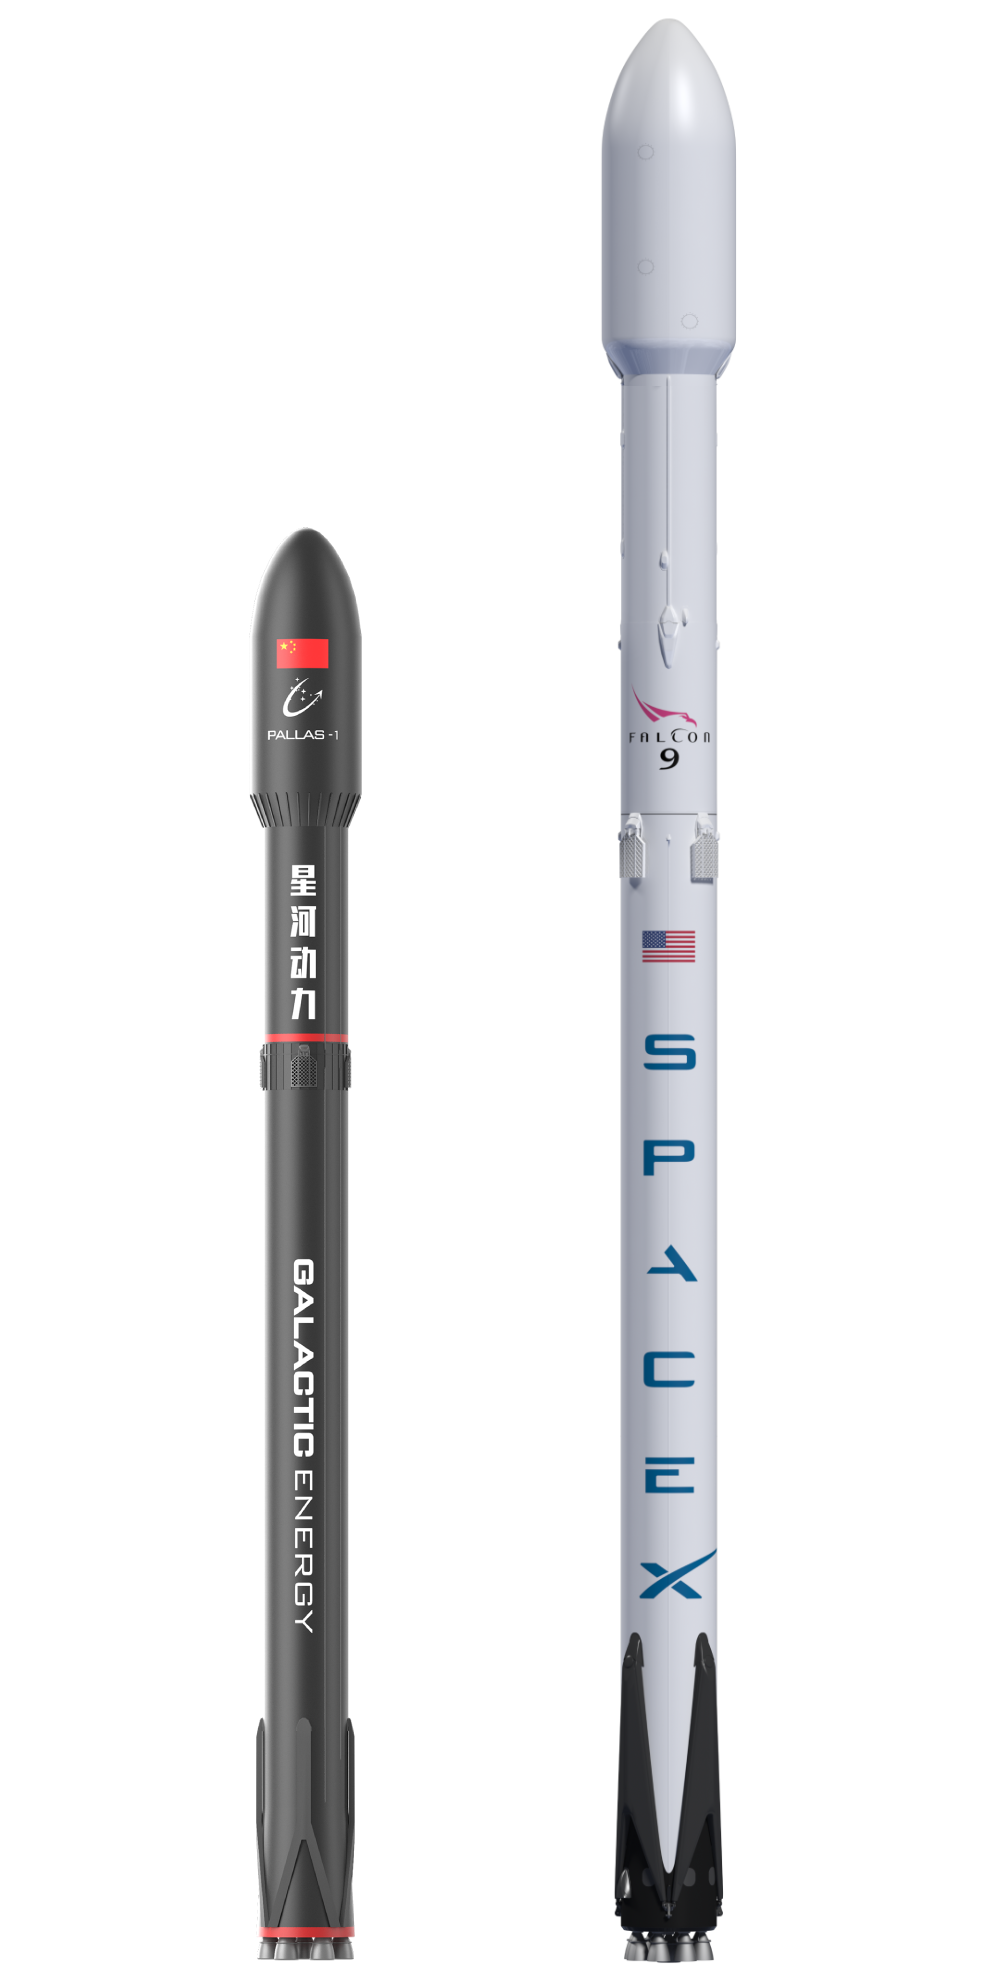 Galactic Enegy's Pallas-1 (left) and SpaceX's Falcon 9. (Not to scale)